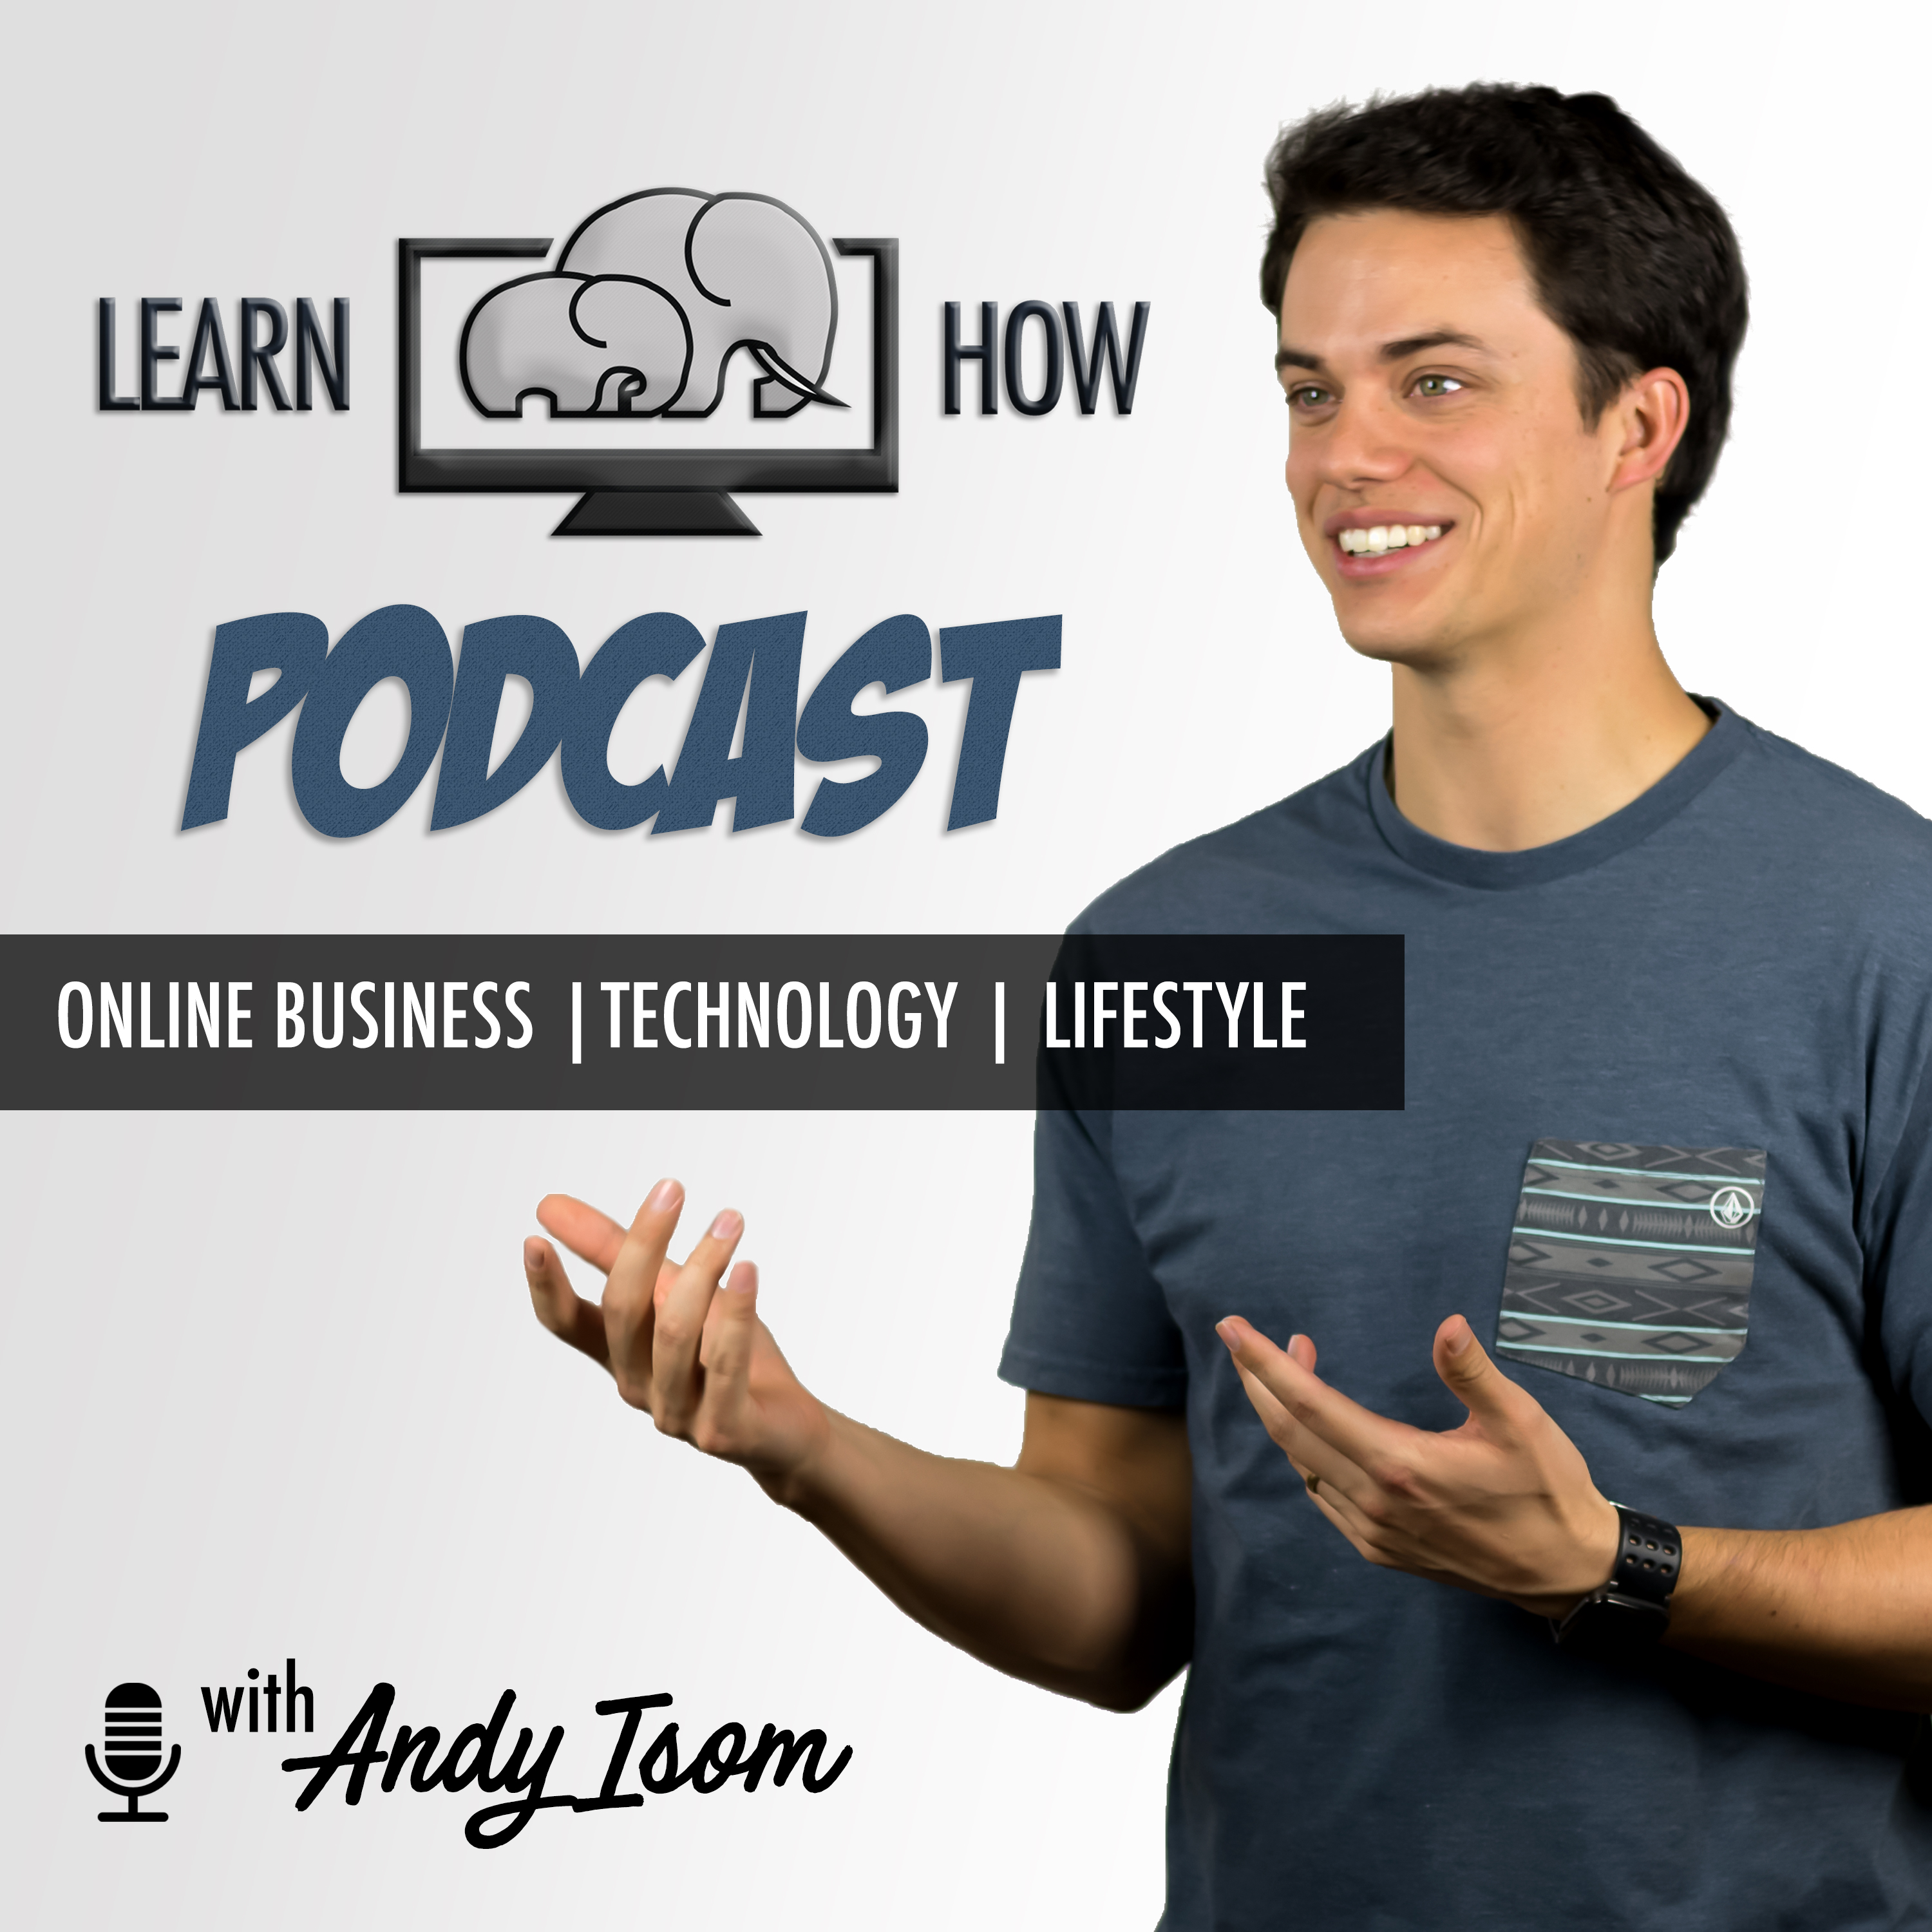 The Learn How Podcast: Online Business | Technology | Lifestyle